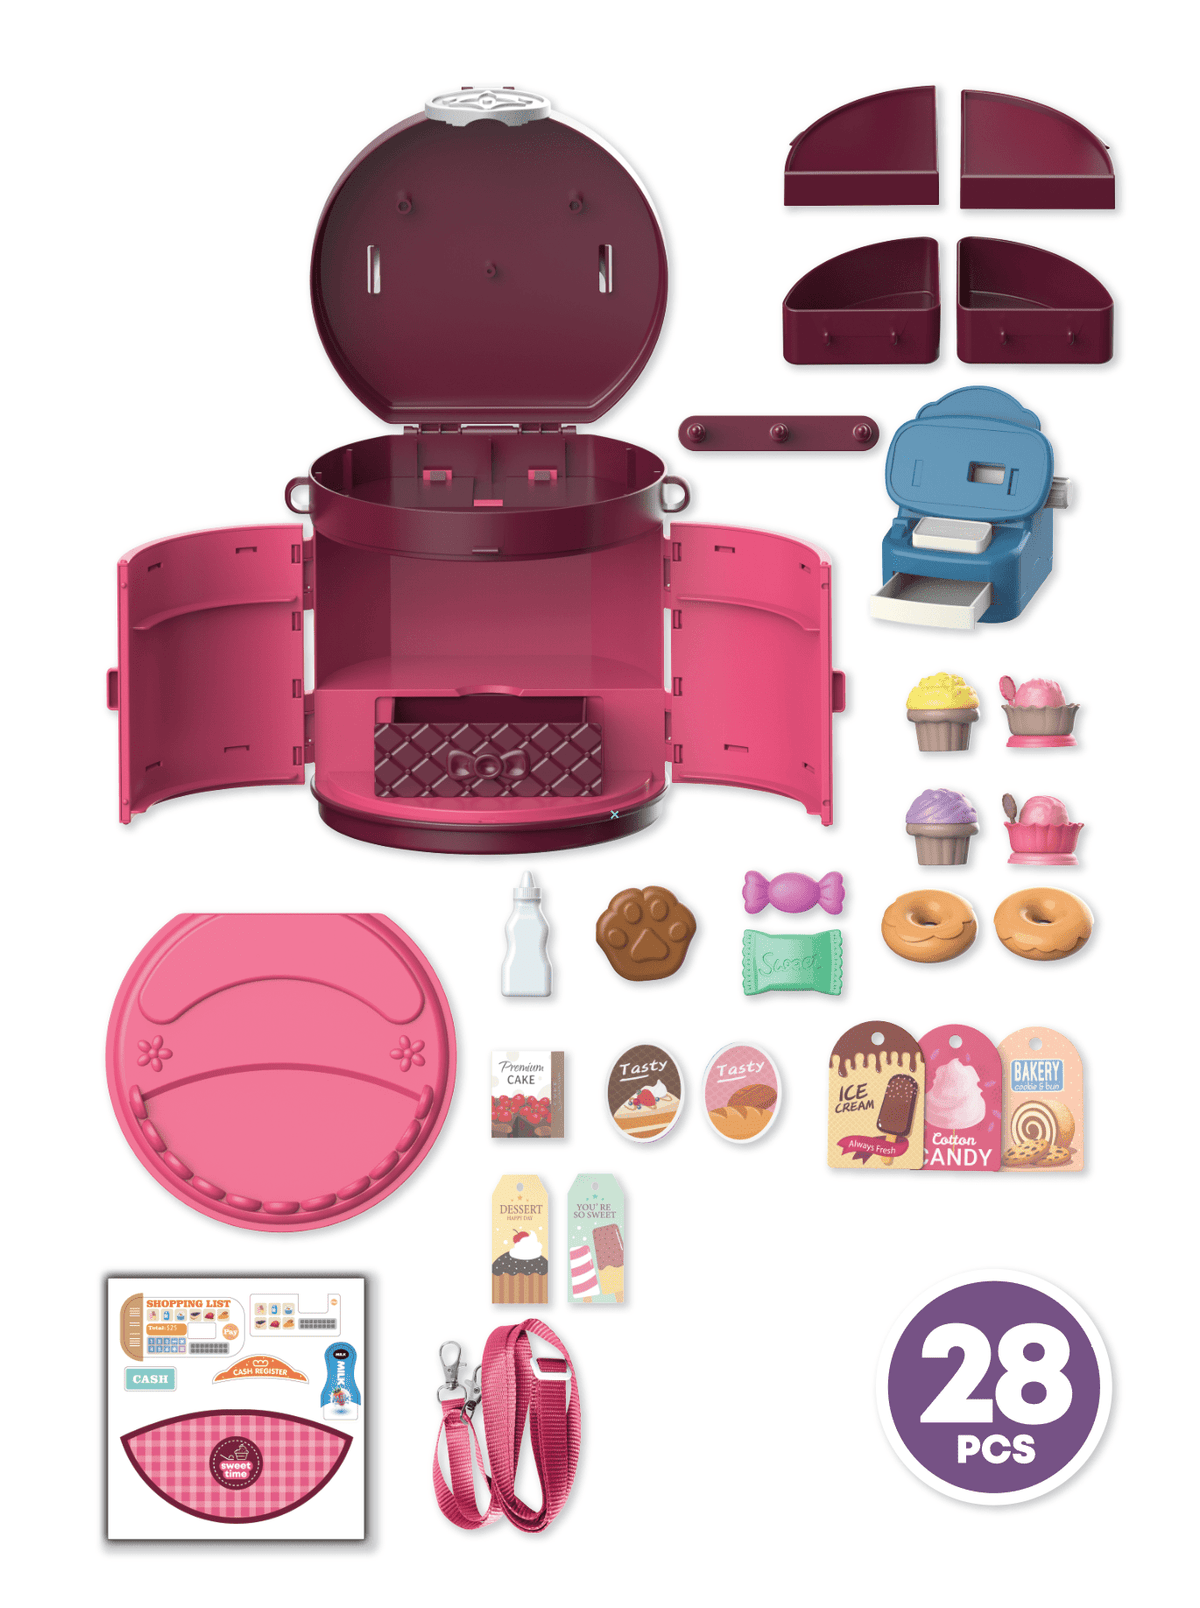 Travel Case Themed Playset - Baking Edition